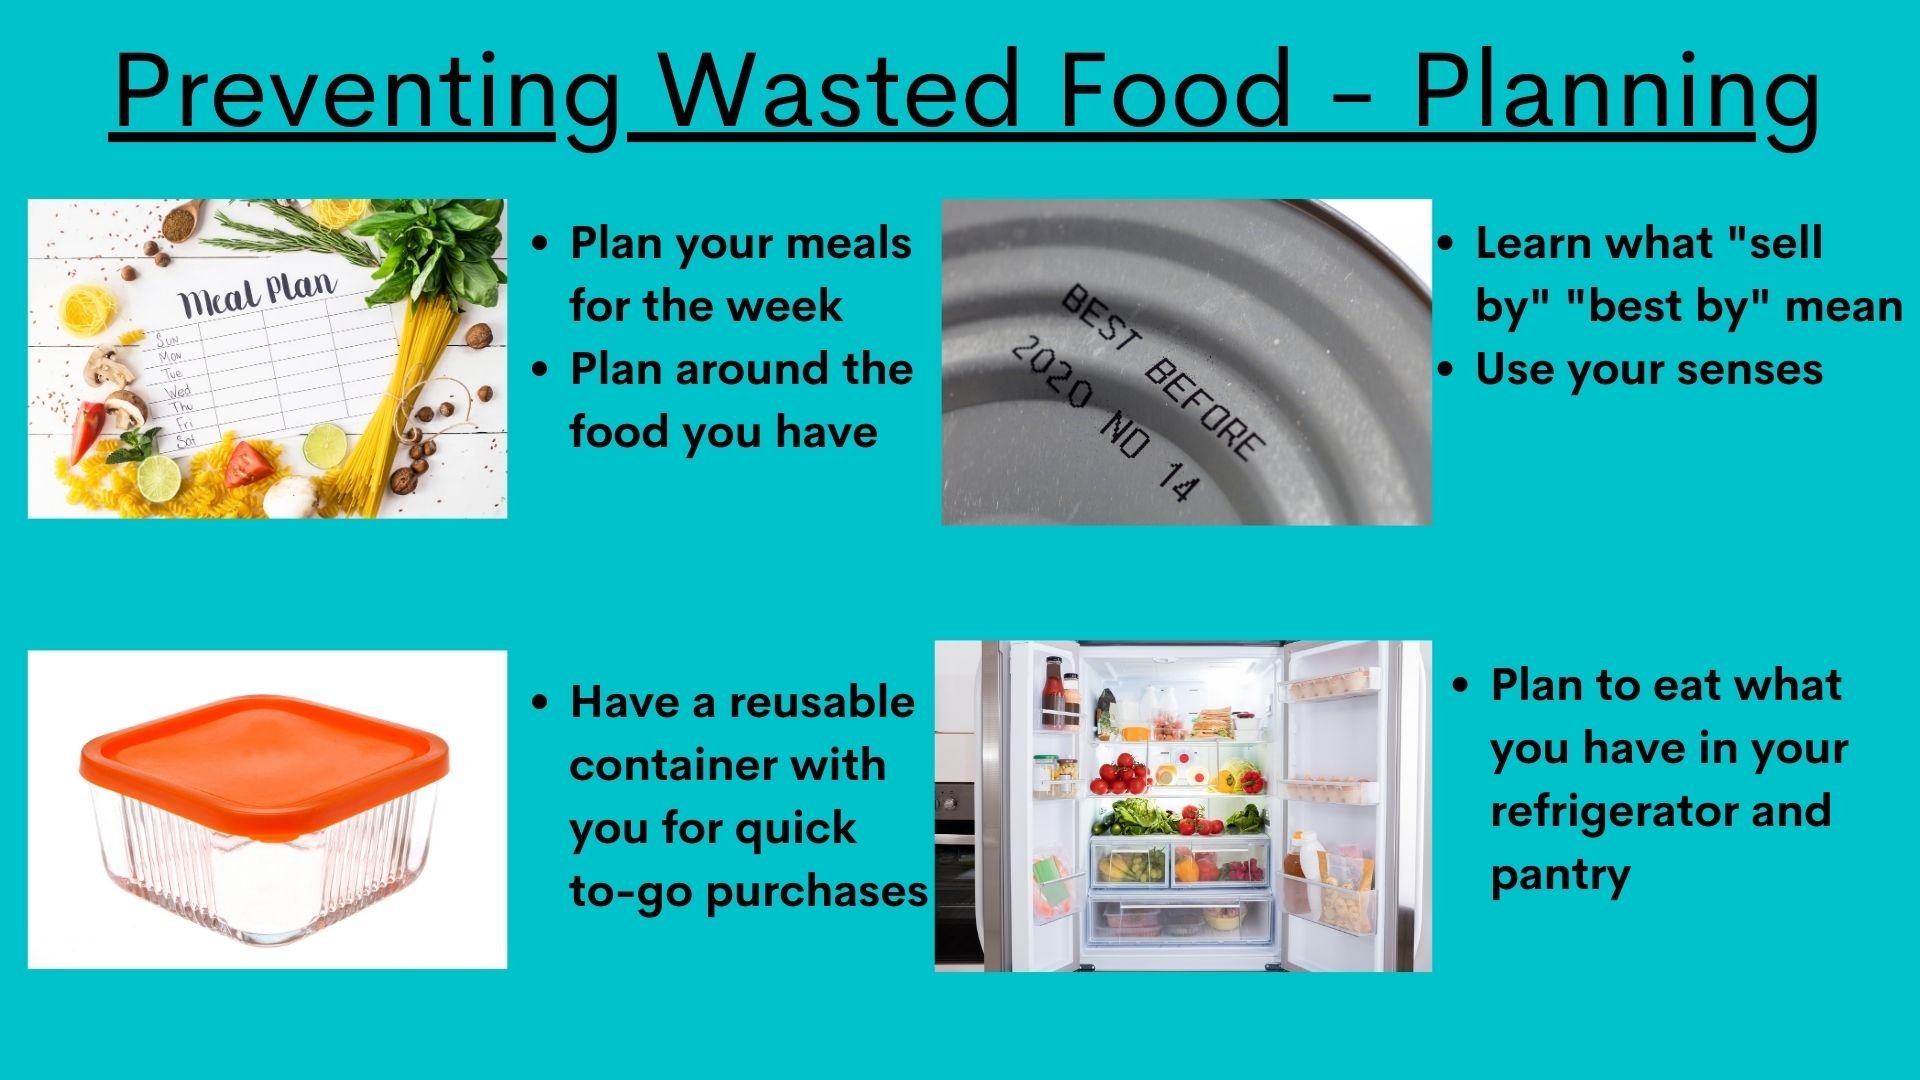 Preventing Wasted Food - Planning.jpg